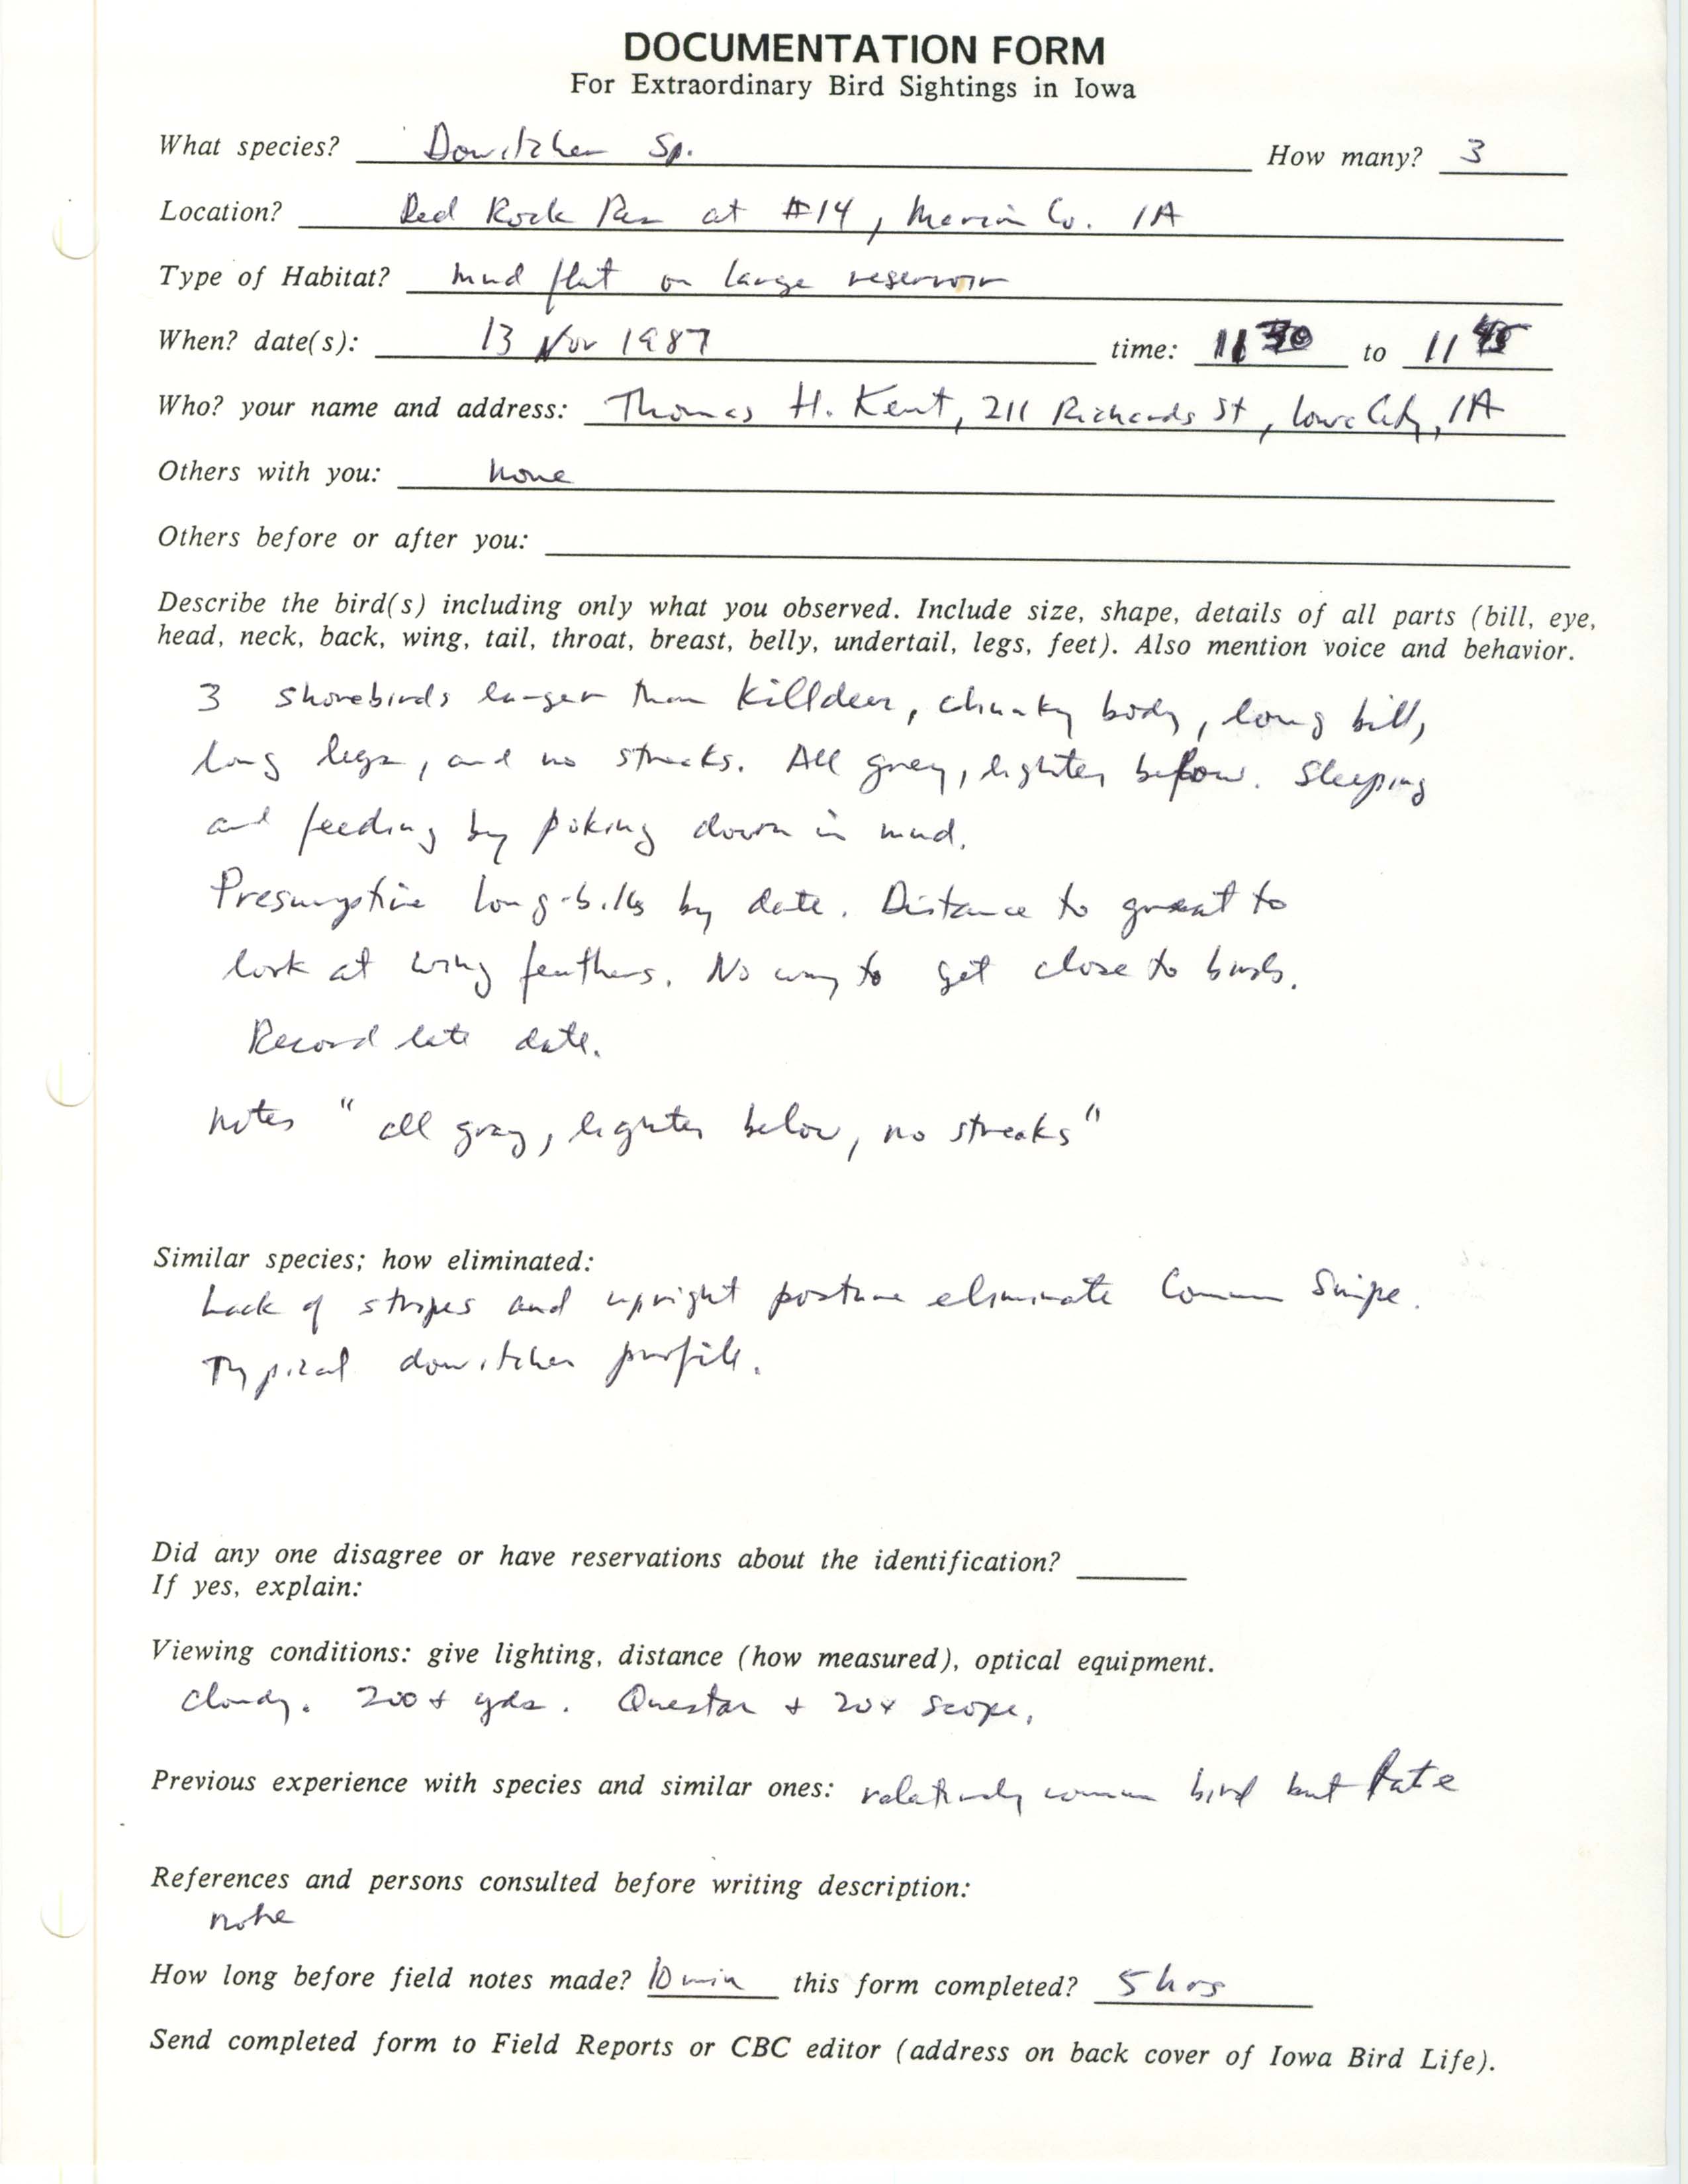 Rare bird documentation form for Dowitcher species at Red Rock Reservoir, 1987